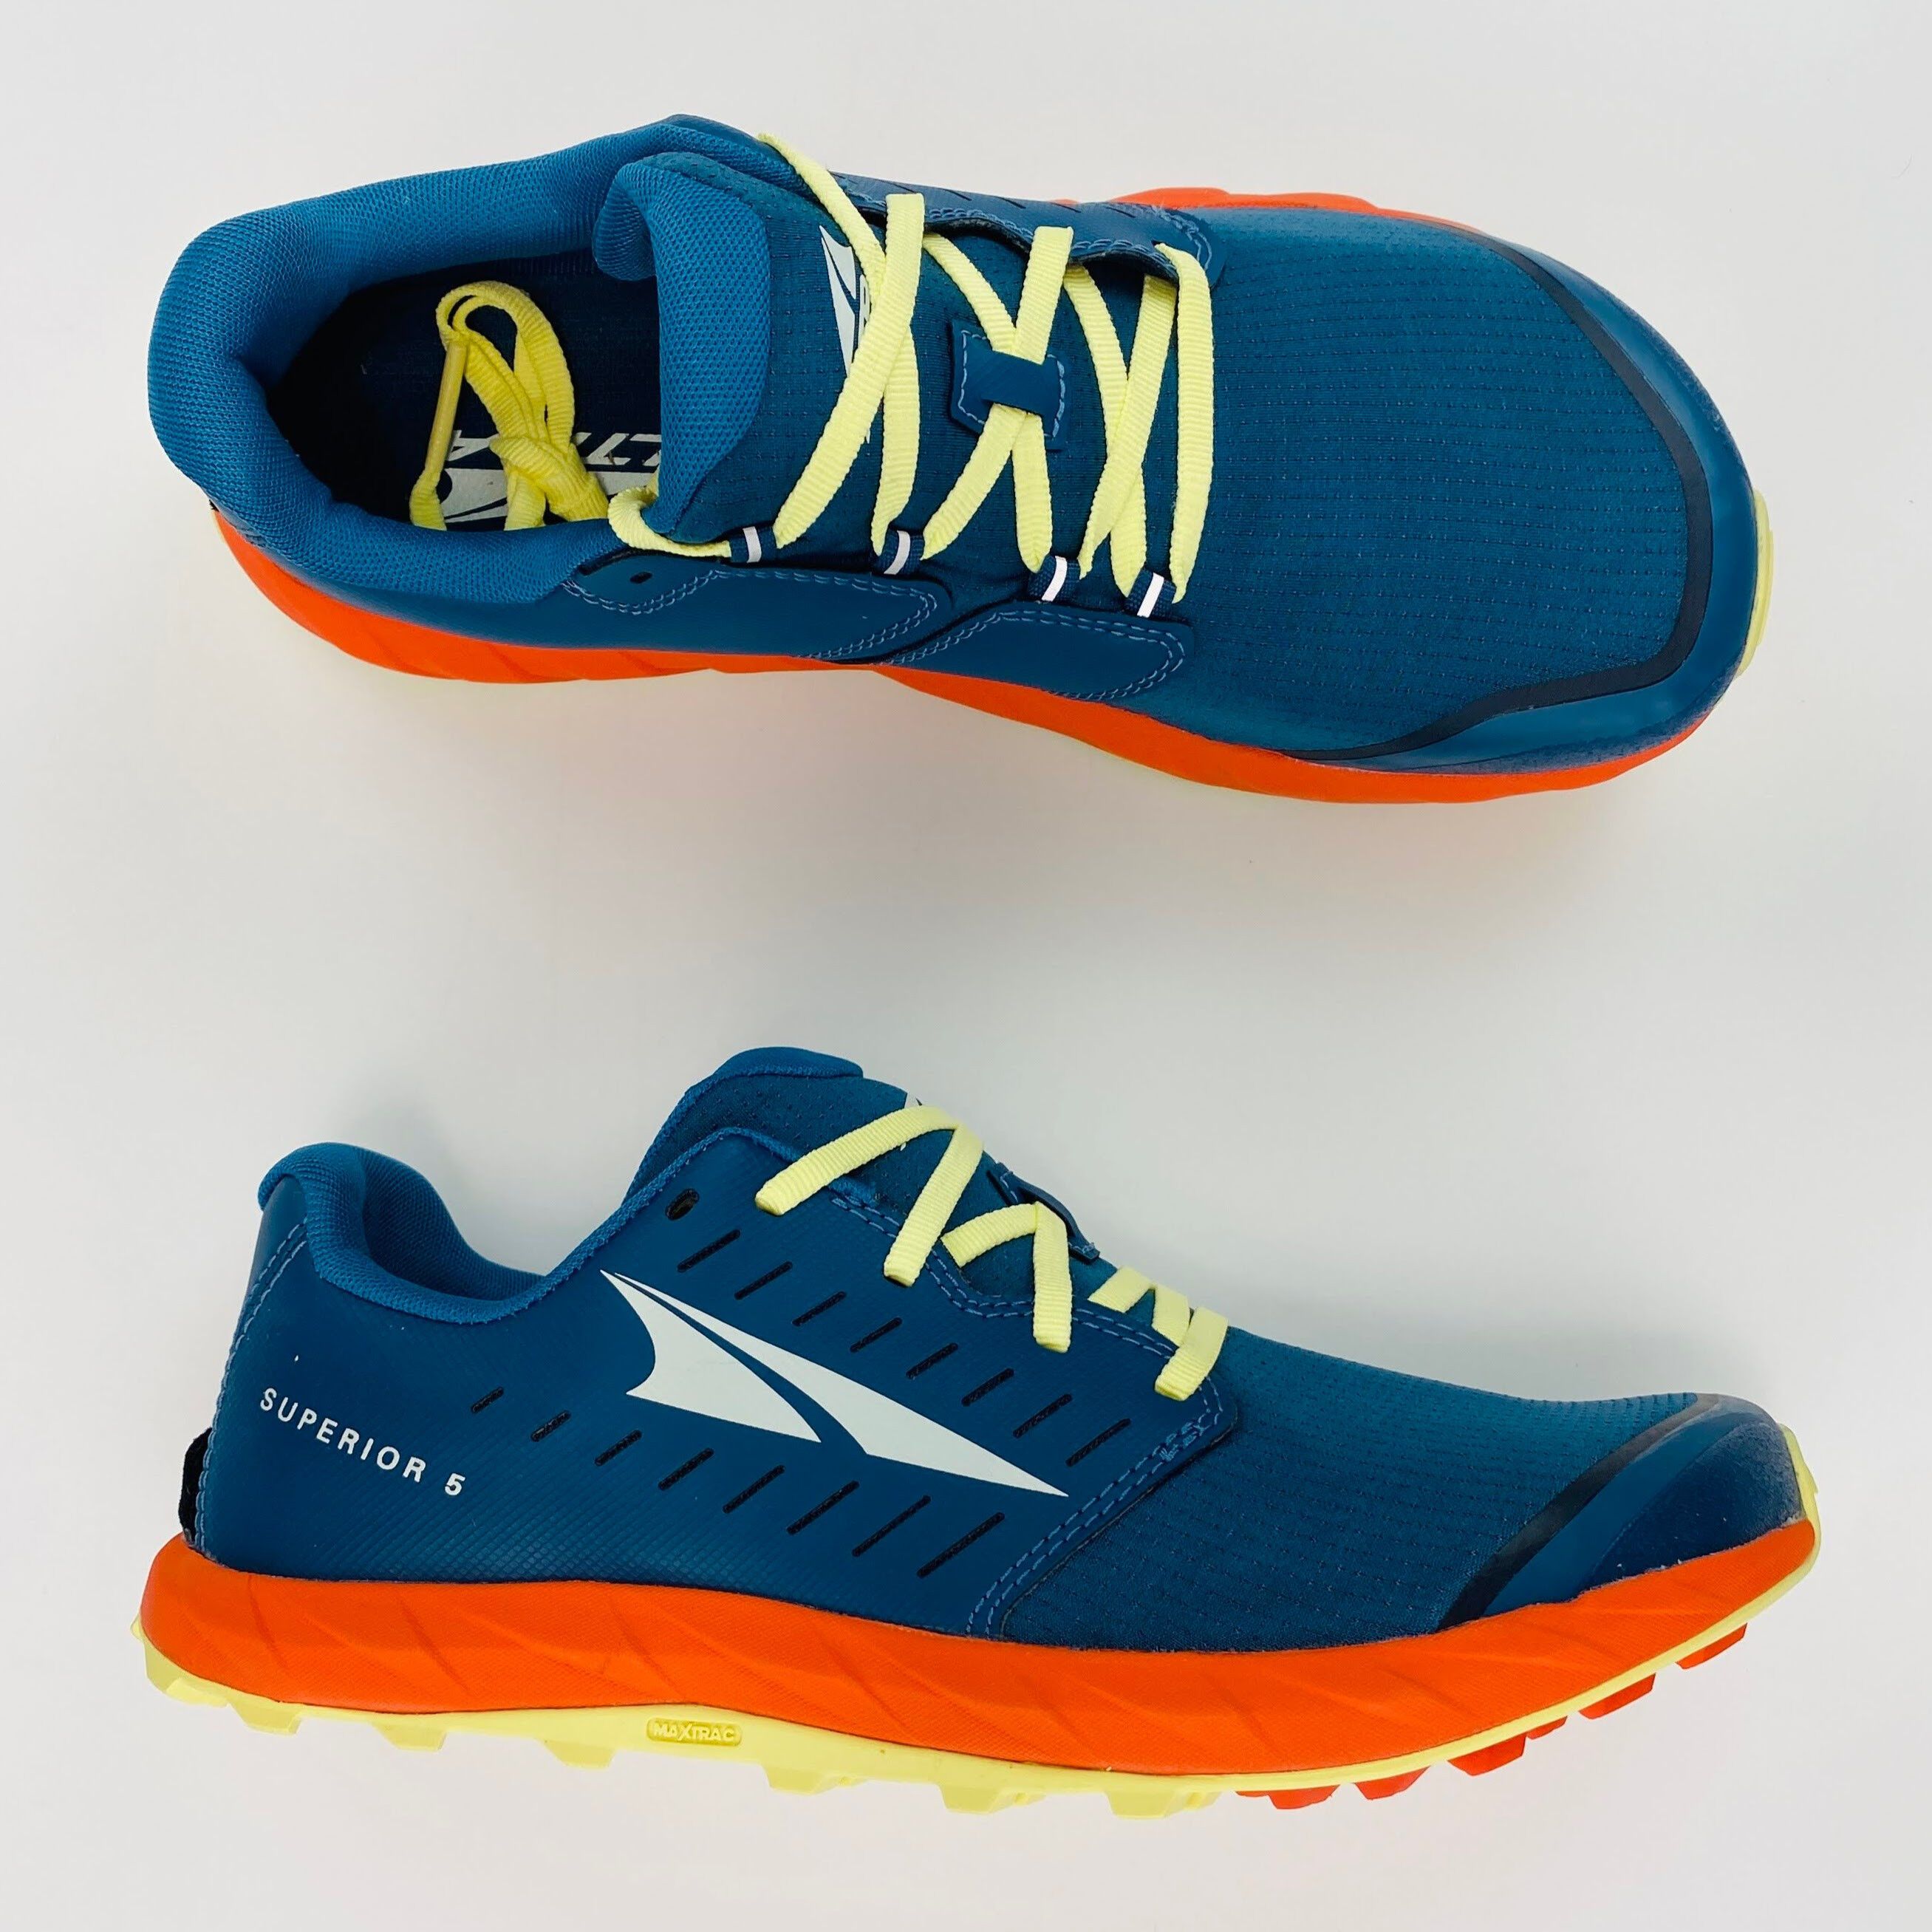 Altra M Superior 5 - Second Hand Trail running shoes - Men's - Blue - 42.5 | Hardloop